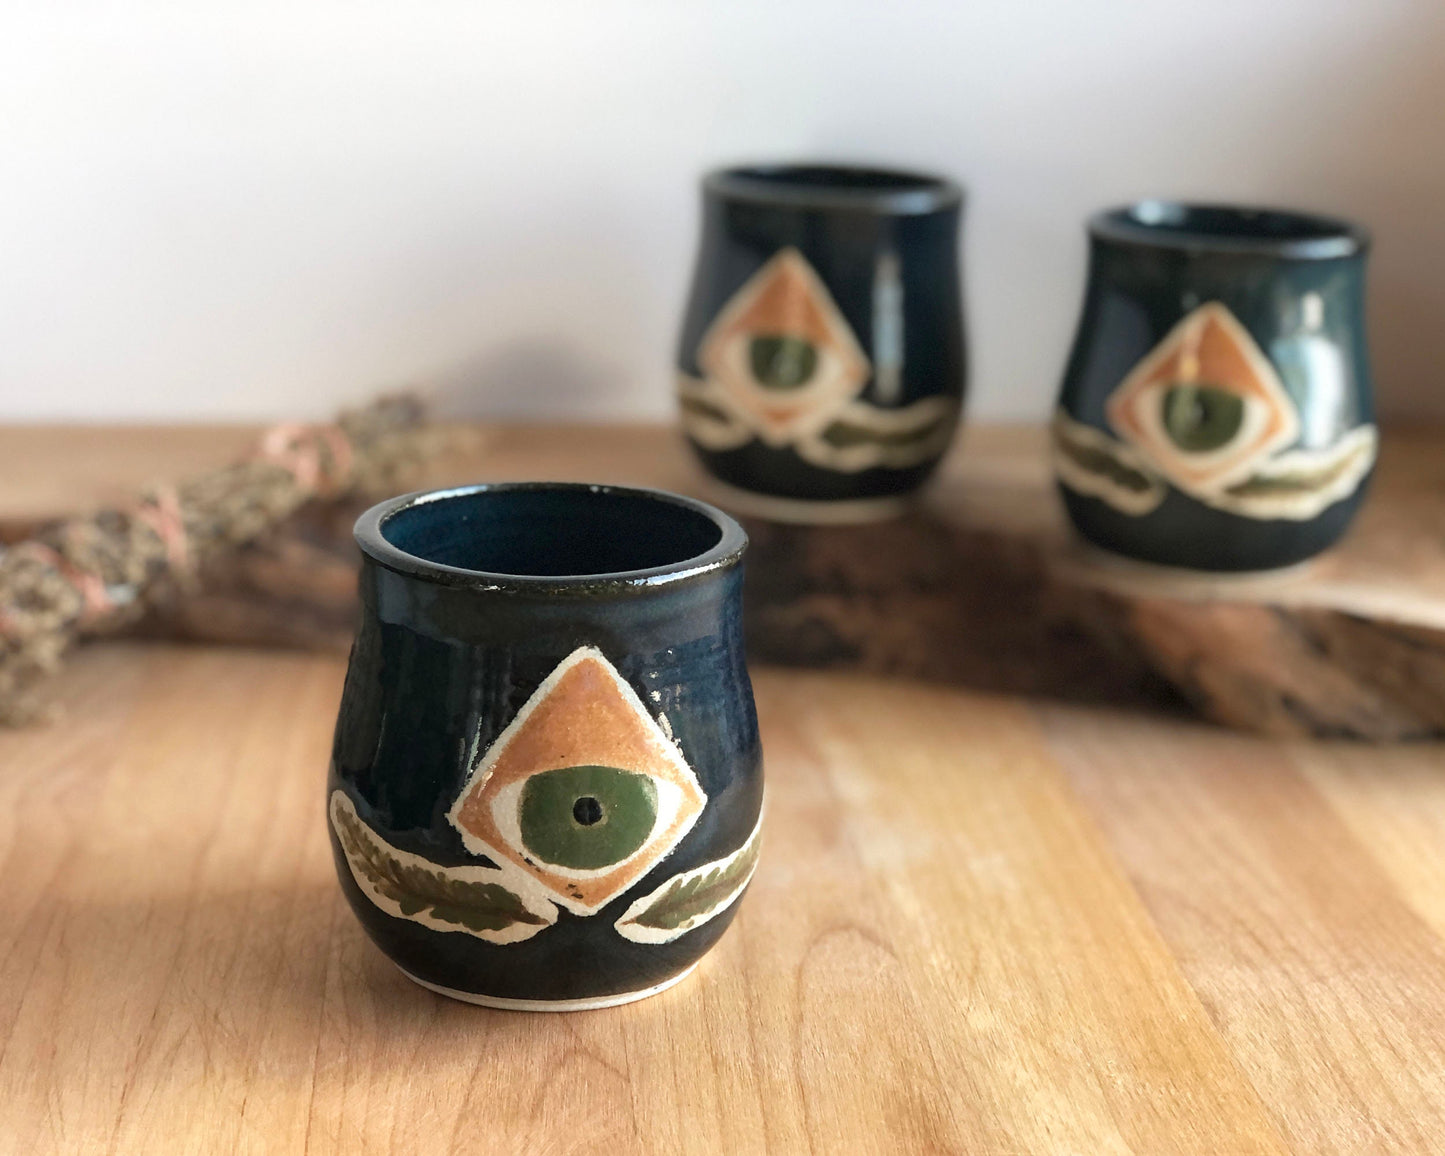 Handmade Ceramic Tumbler - Ceramic Cup - Black with Eye of Protection